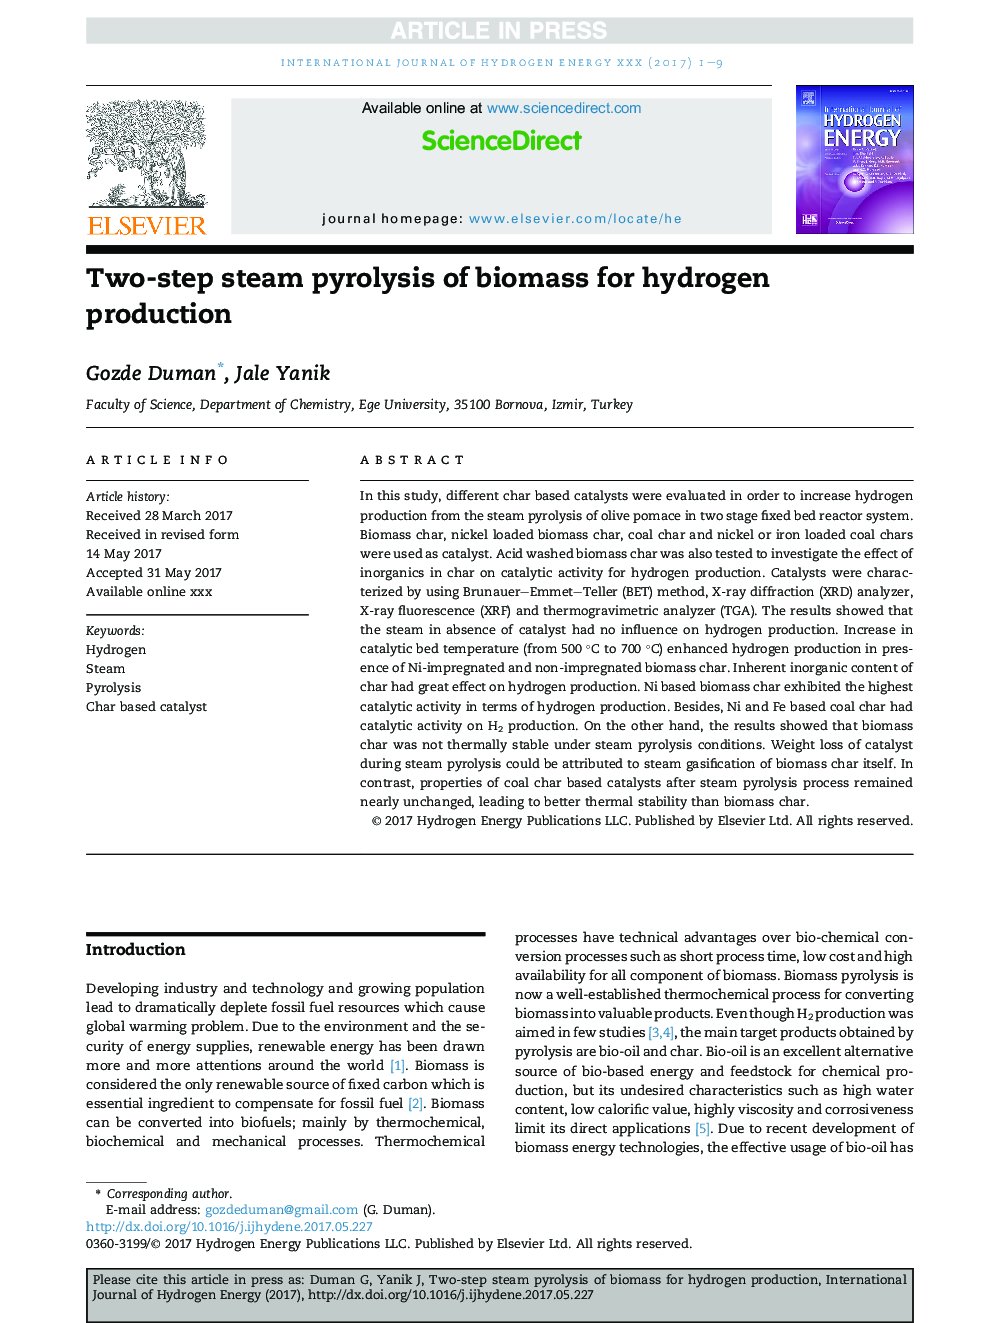 Two-step steam pyrolysis of biomass for hydrogen production